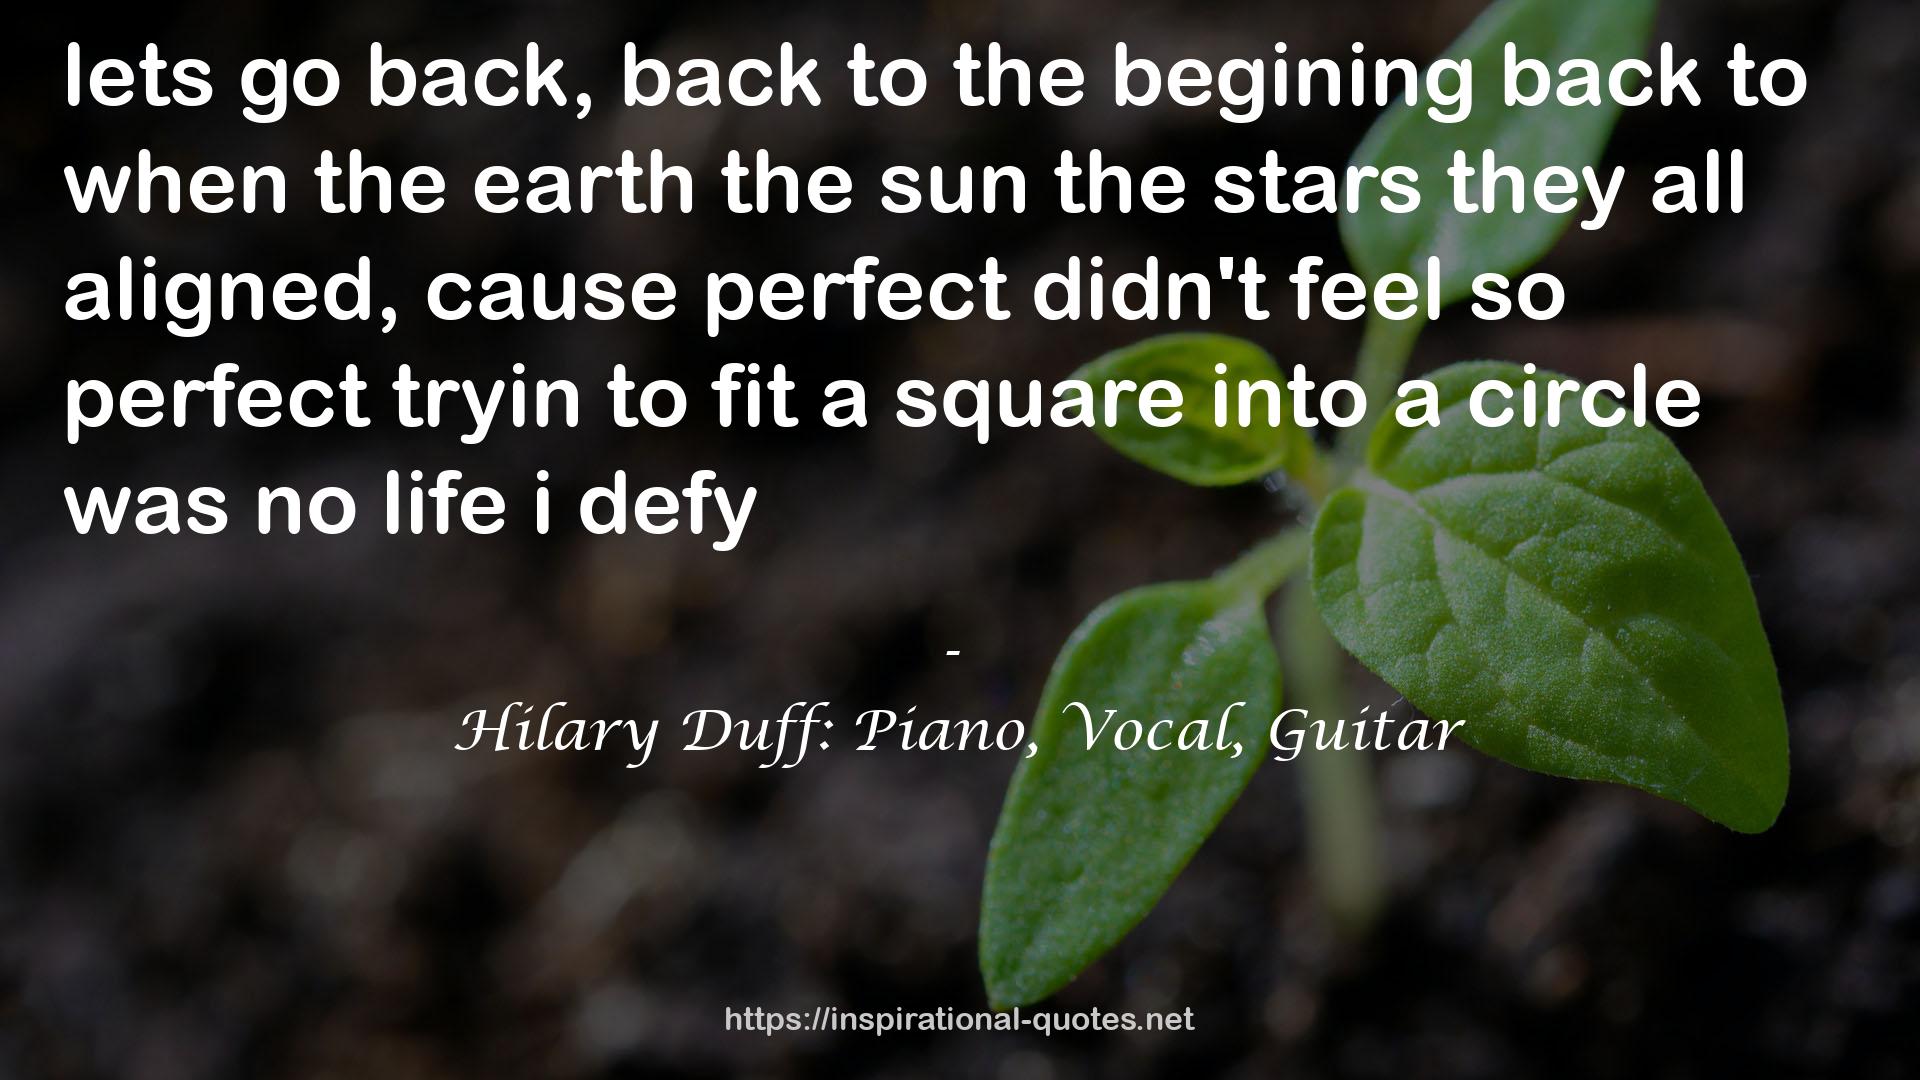 Hilary Duff: Piano, Vocal, Guitar QUOTES